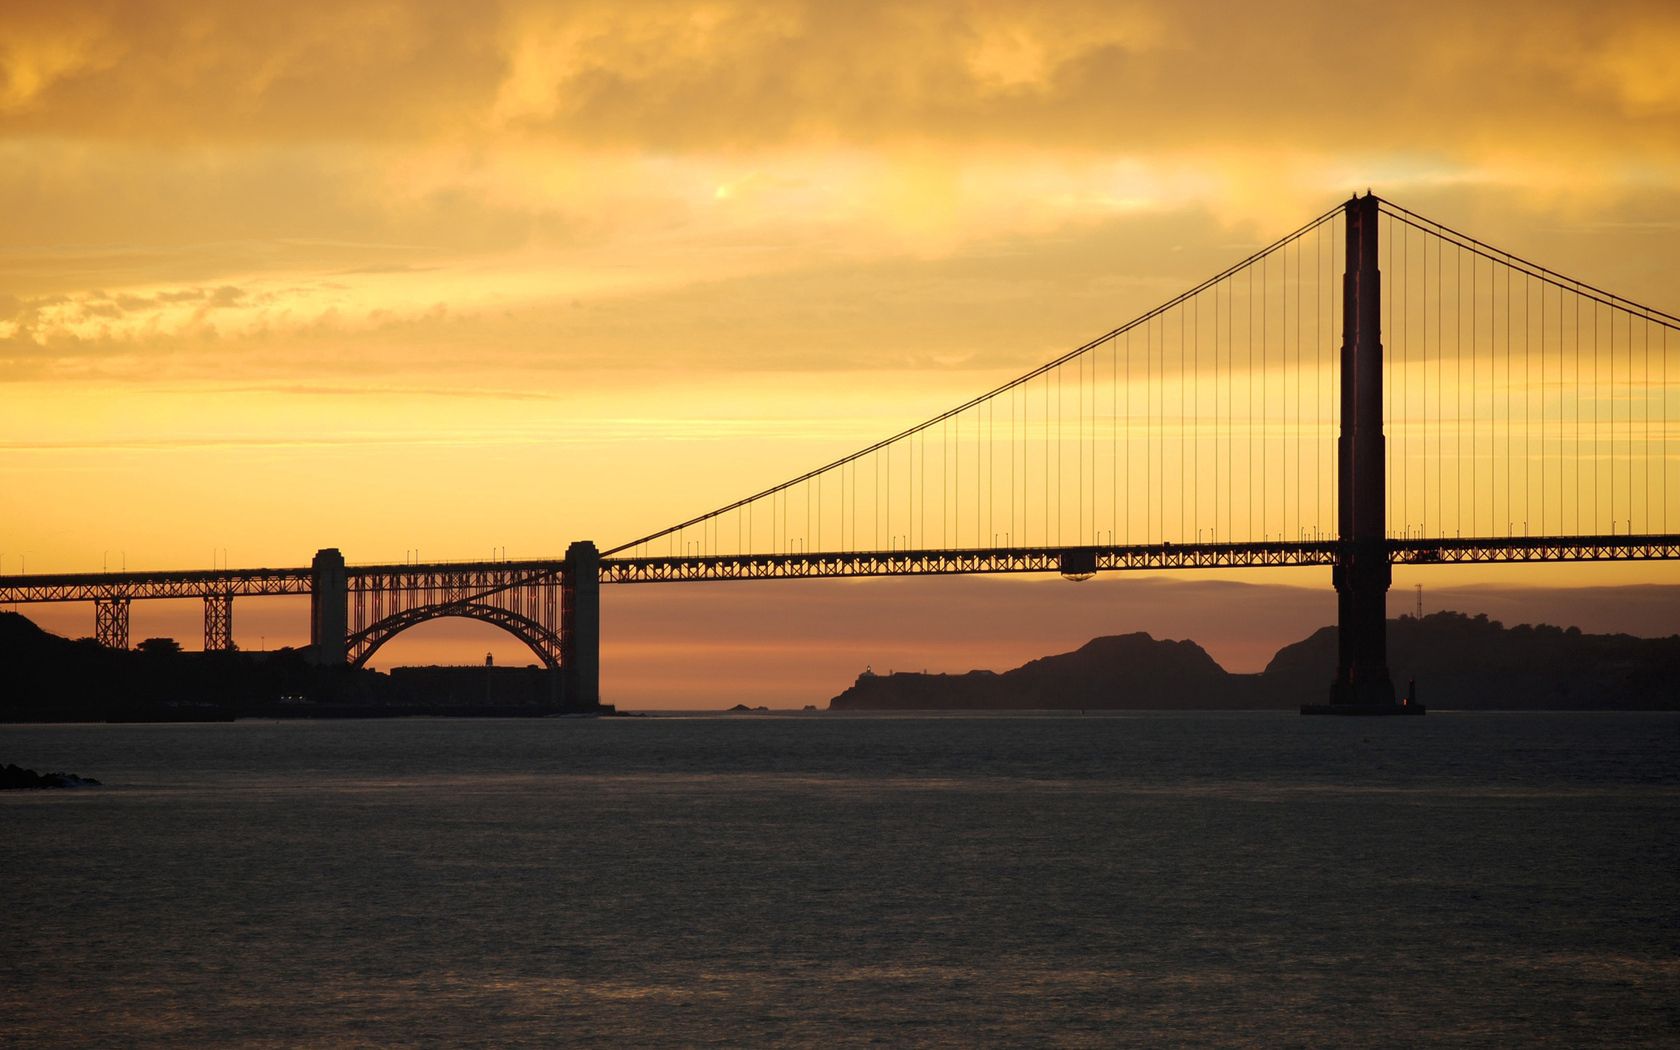 102212 free wallpaper 2160x3840 for phone, download images sea, san francisco, night, bridge 2160x3840 for mobile